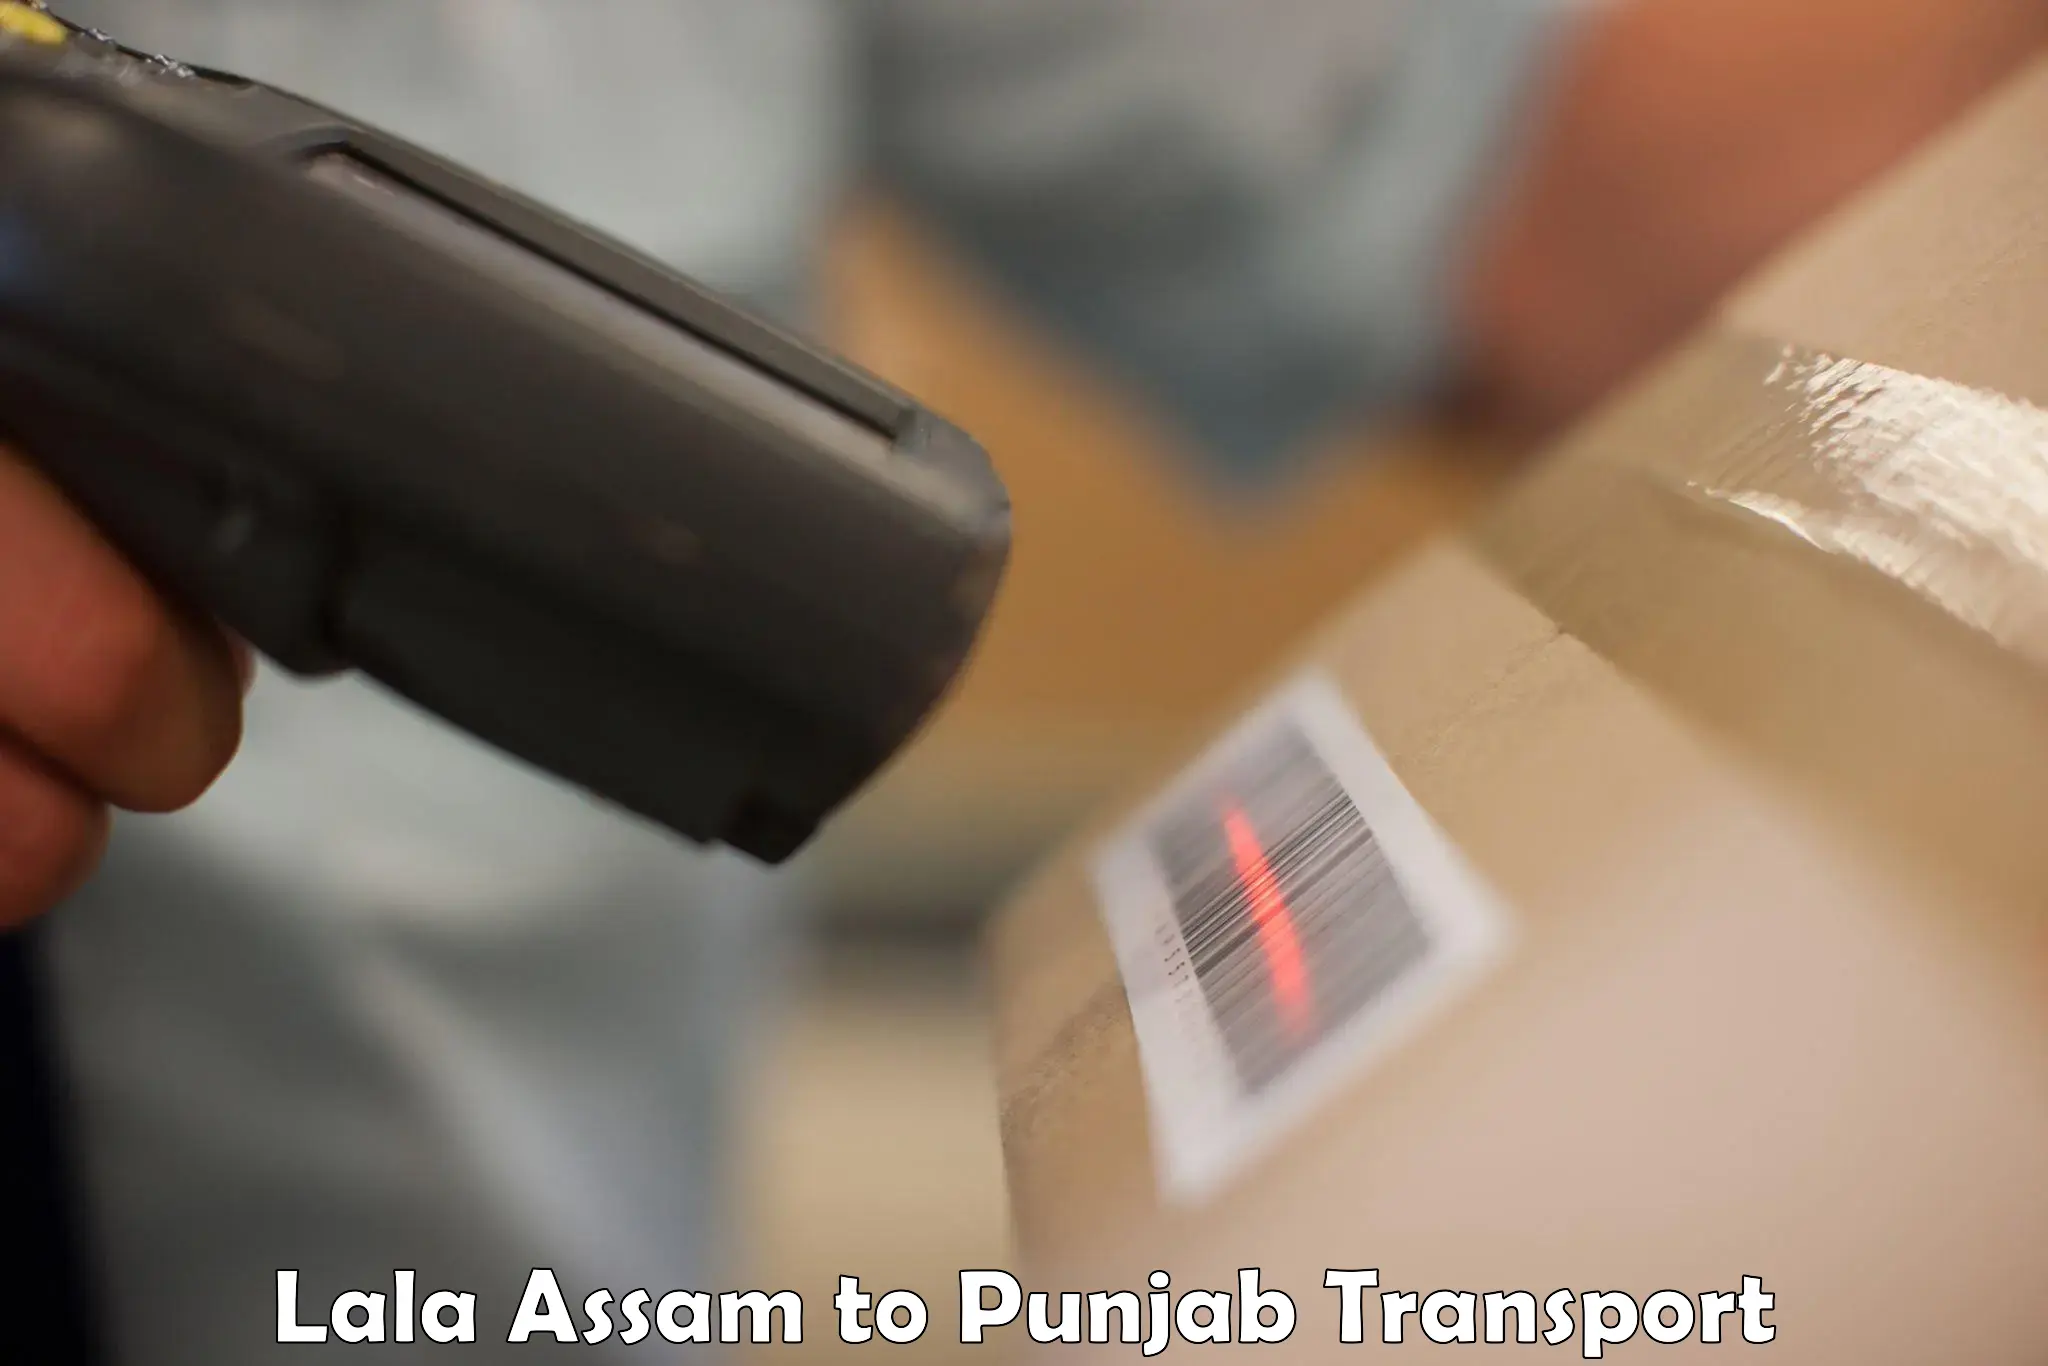 Goods delivery service Lala Assam to Tarsikka